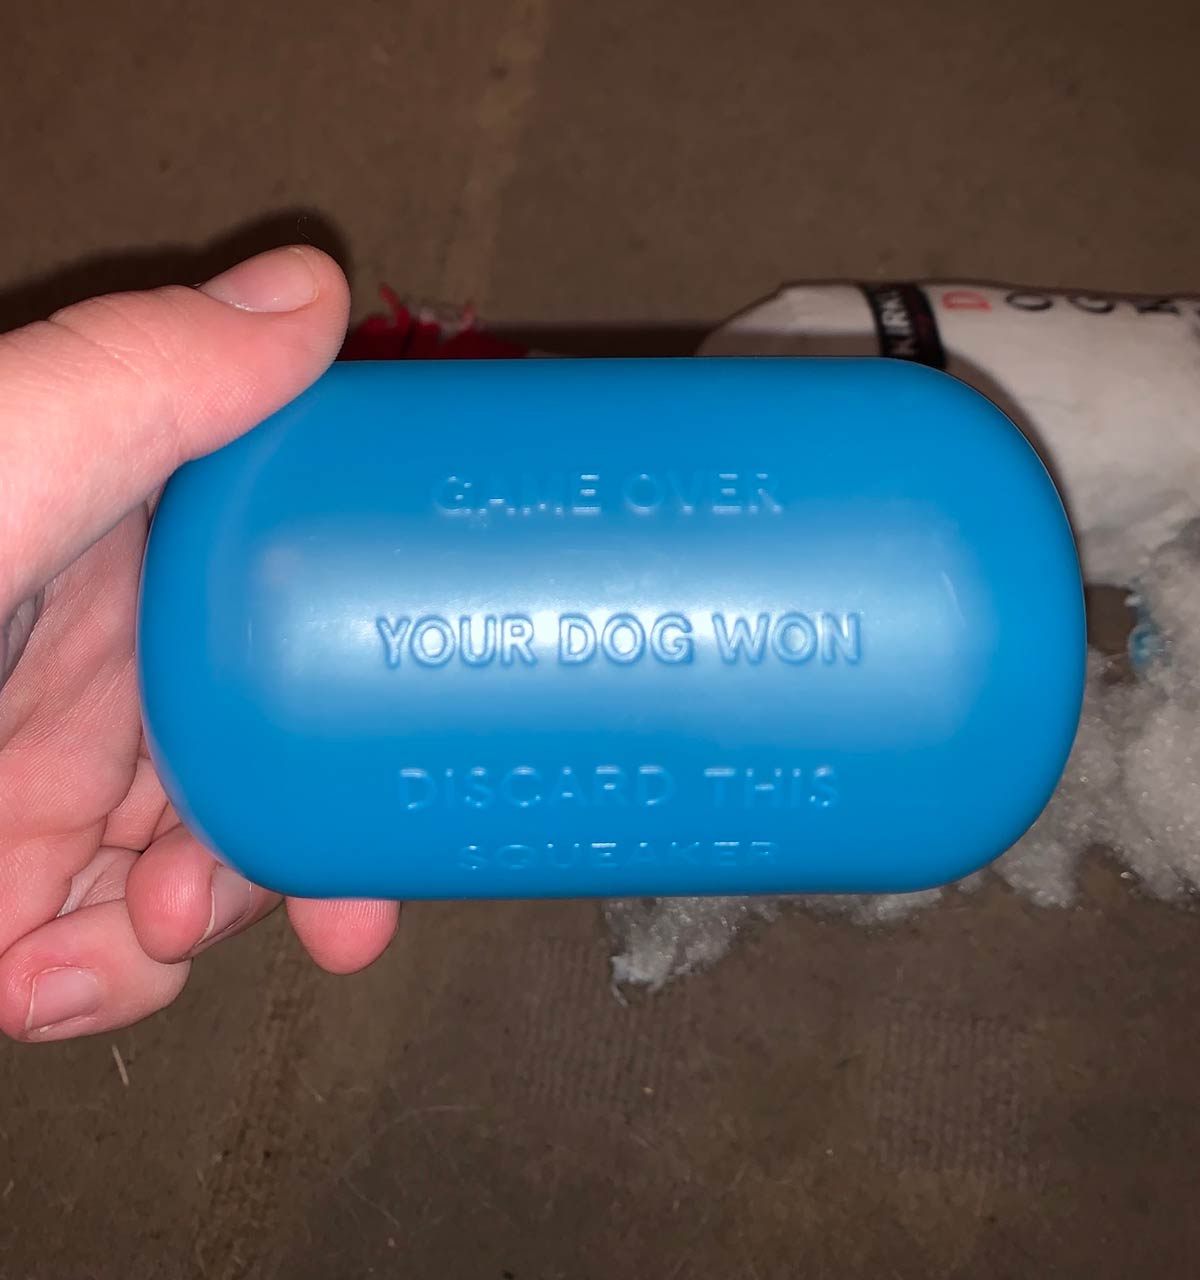 Squeaker inside a dog toy